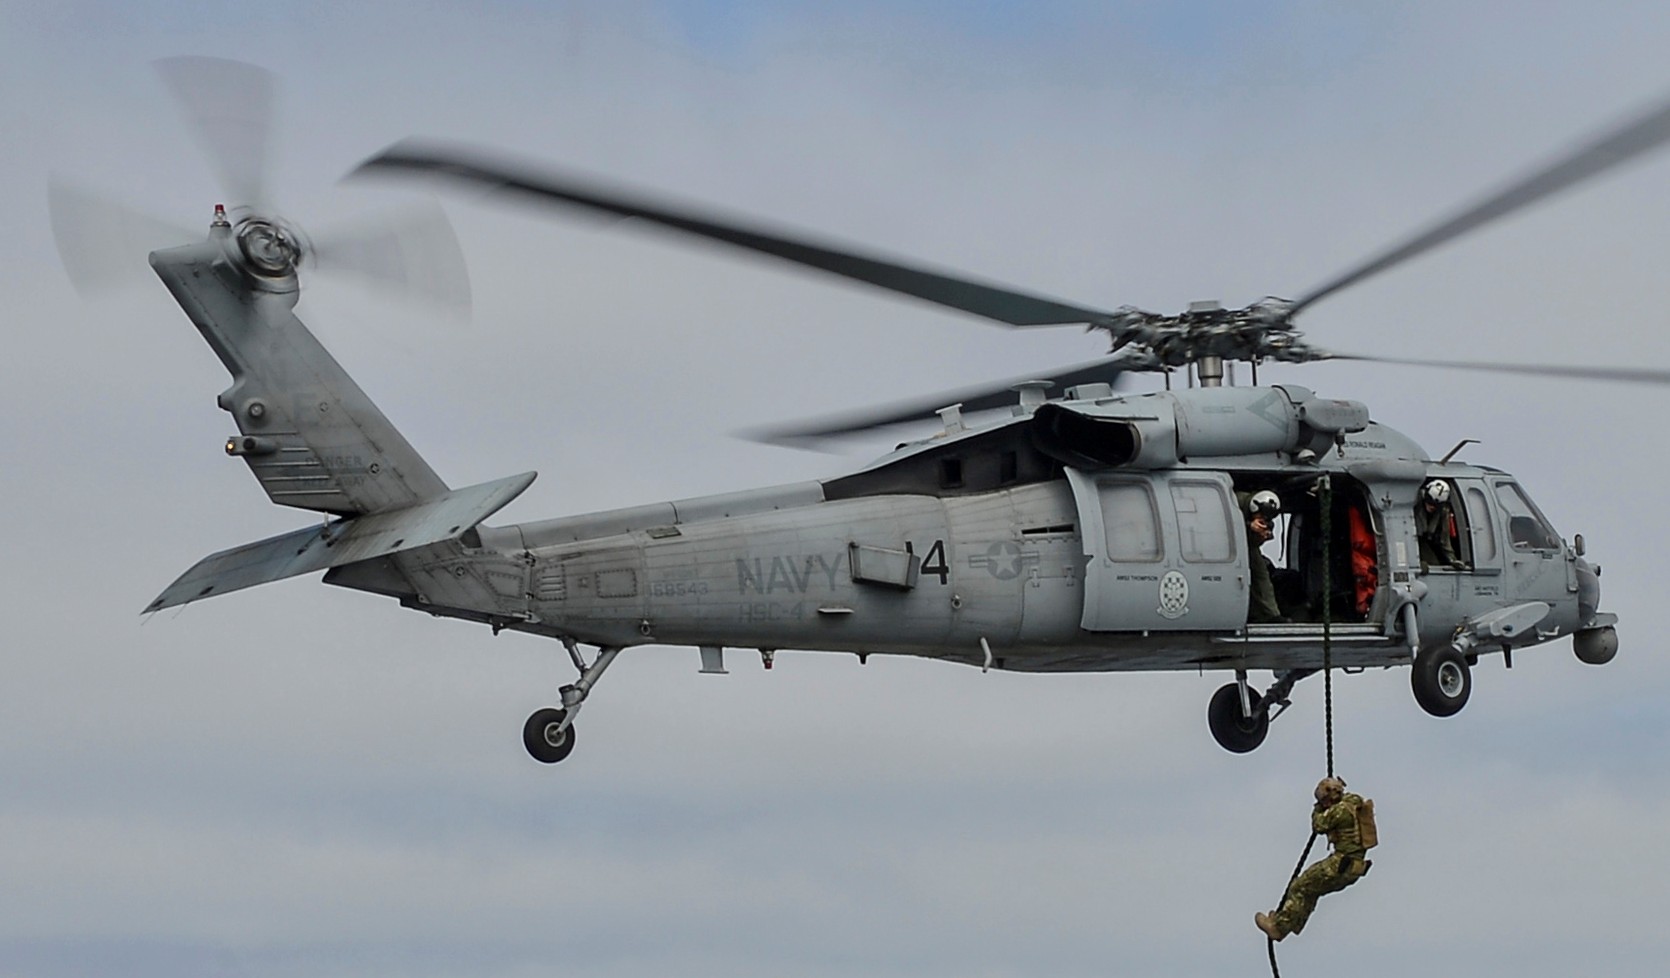 hsc-4 black knights helicopter sea combat squadron us navy mh-60s seahawk 2015 27 uss ronald reagan cvn-76 cvw-2